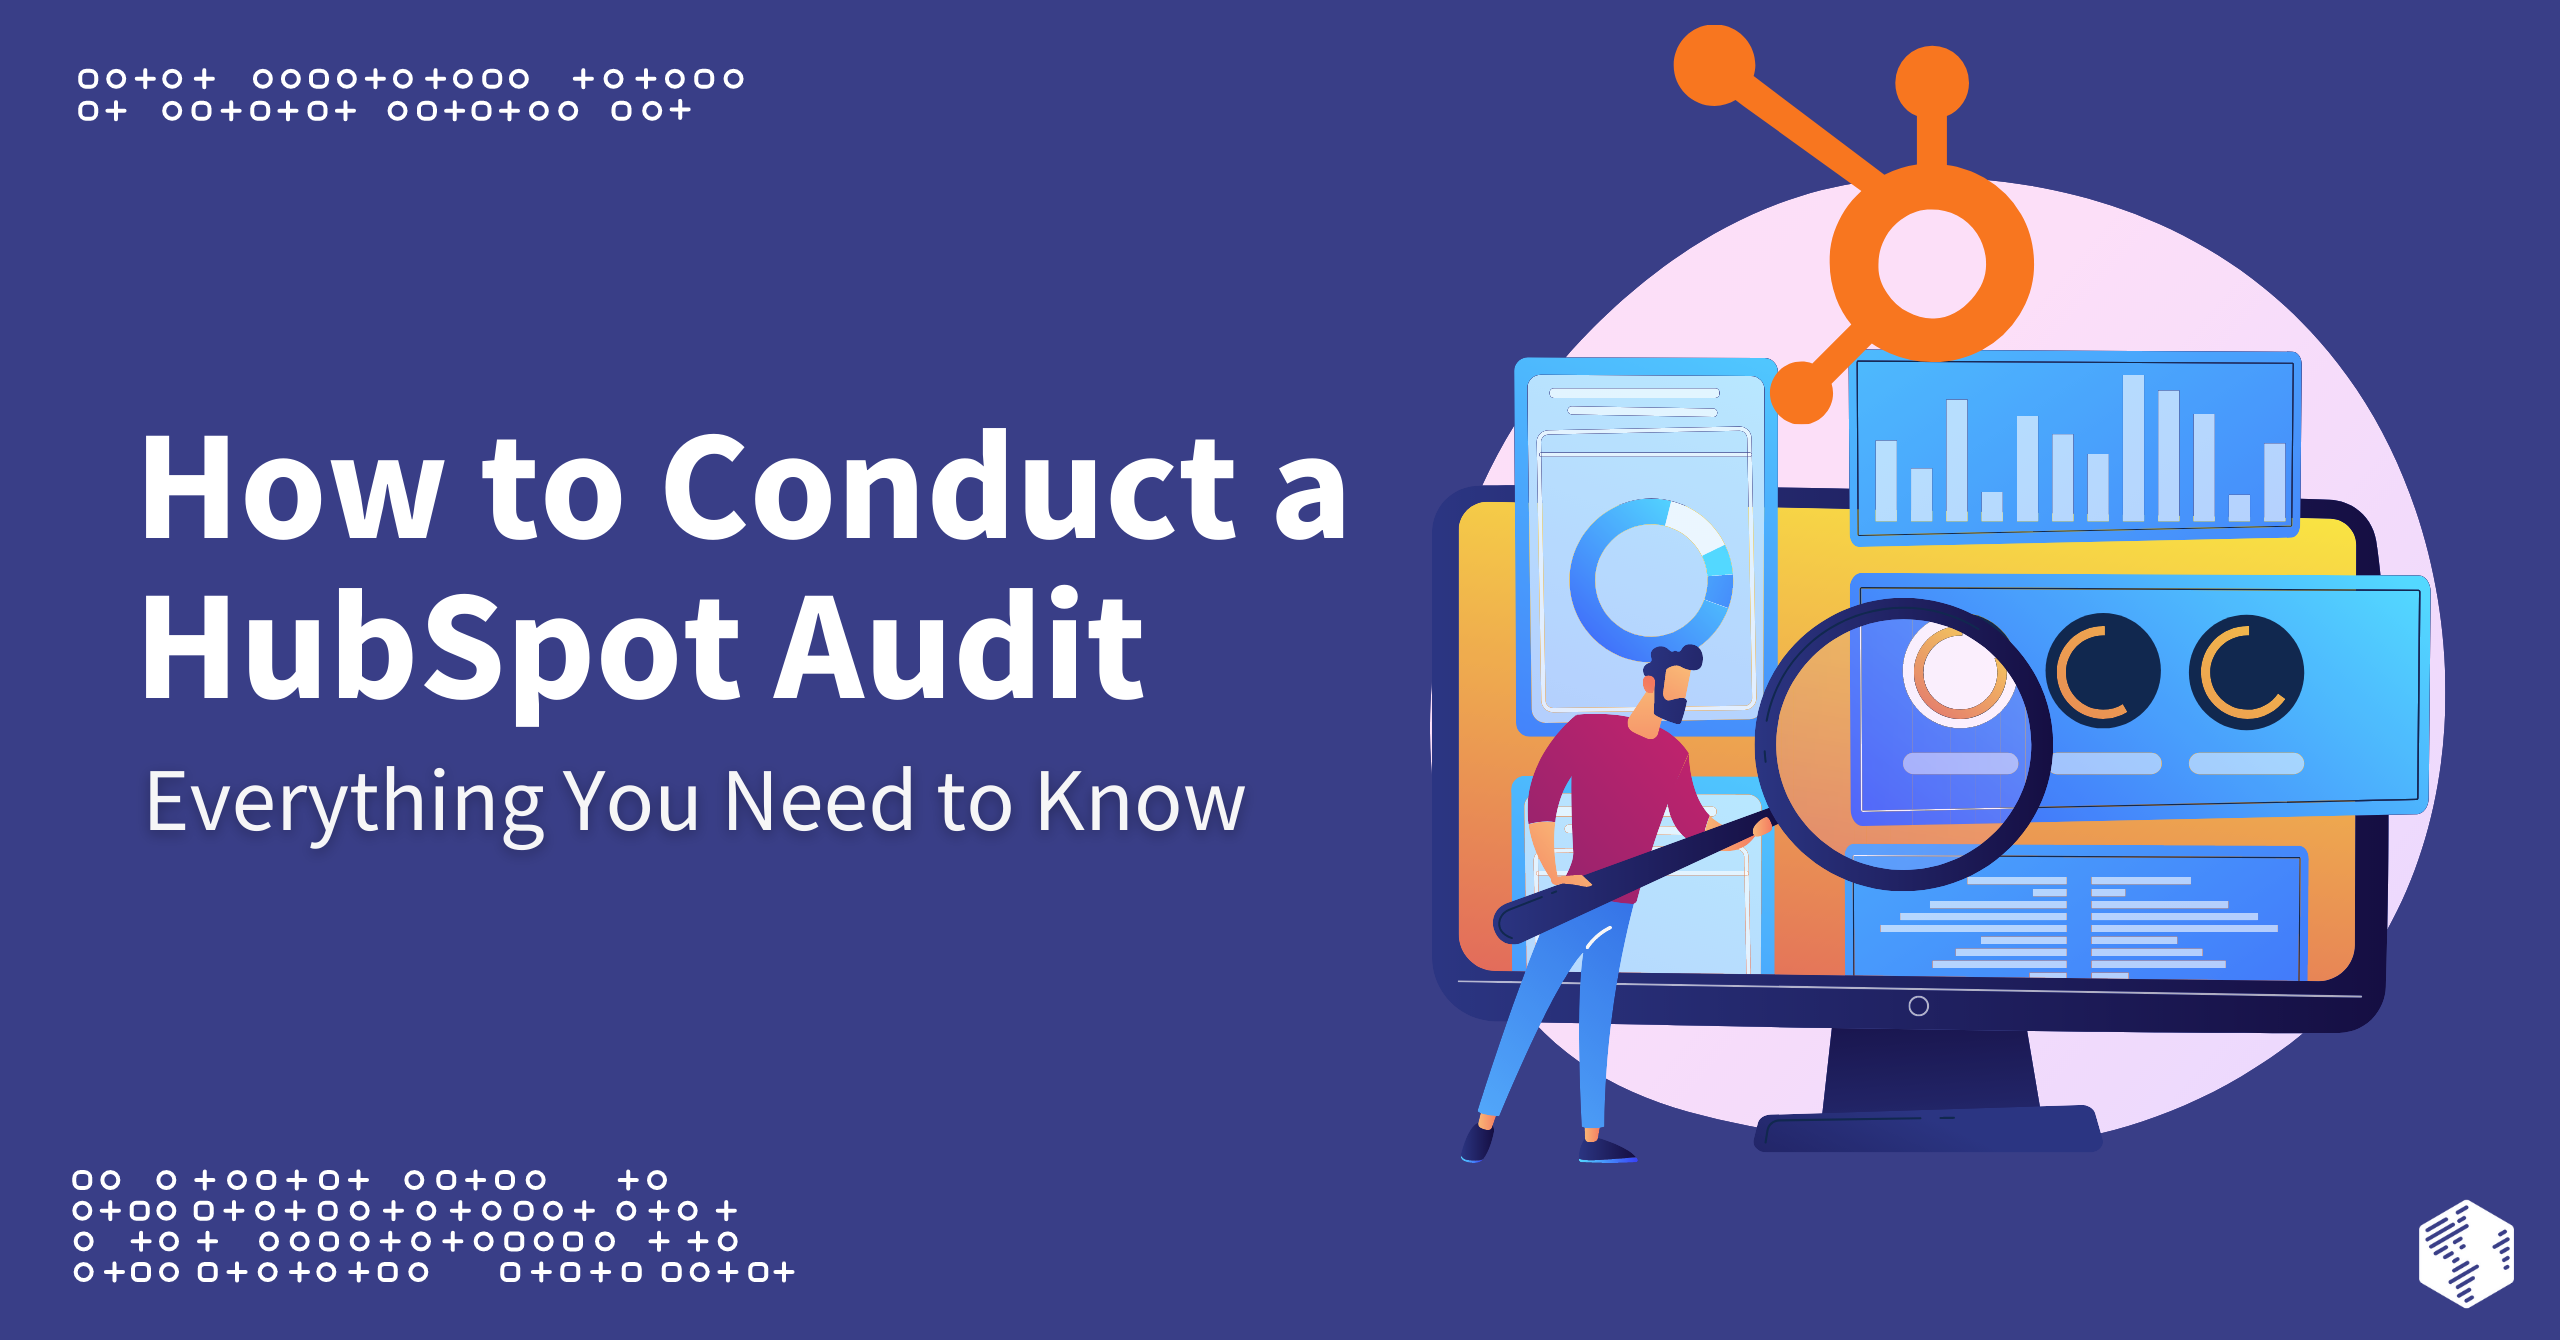 How to Conduct a HubSpot Audit: Everything You Need to Know